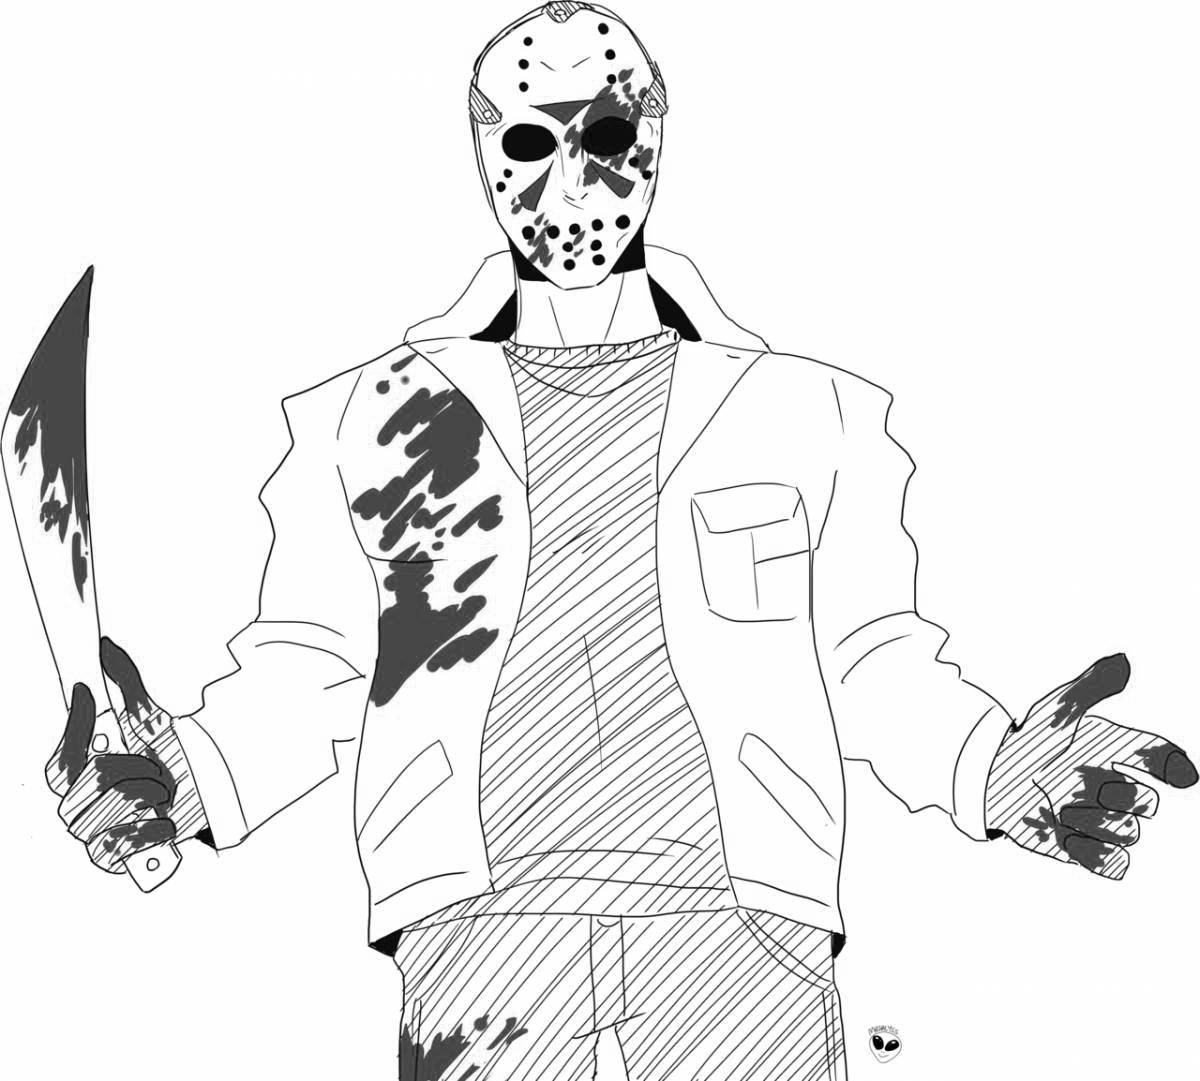 Sinister Friday the 13th coloring book